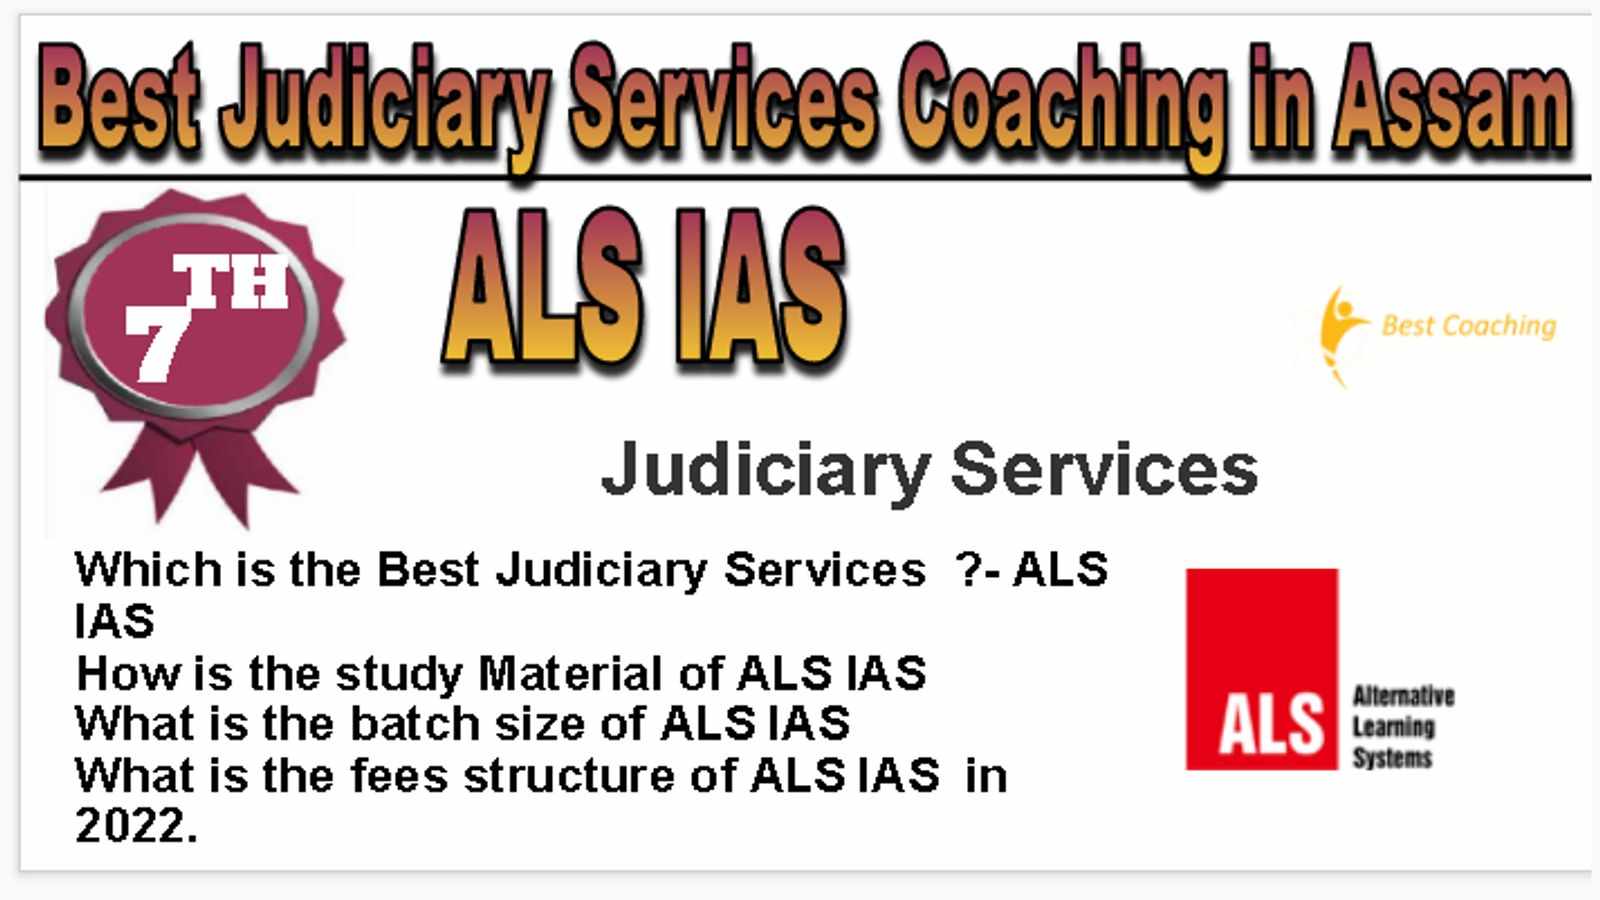 Rank 7 Best Judiciary Services Coaching in Assam